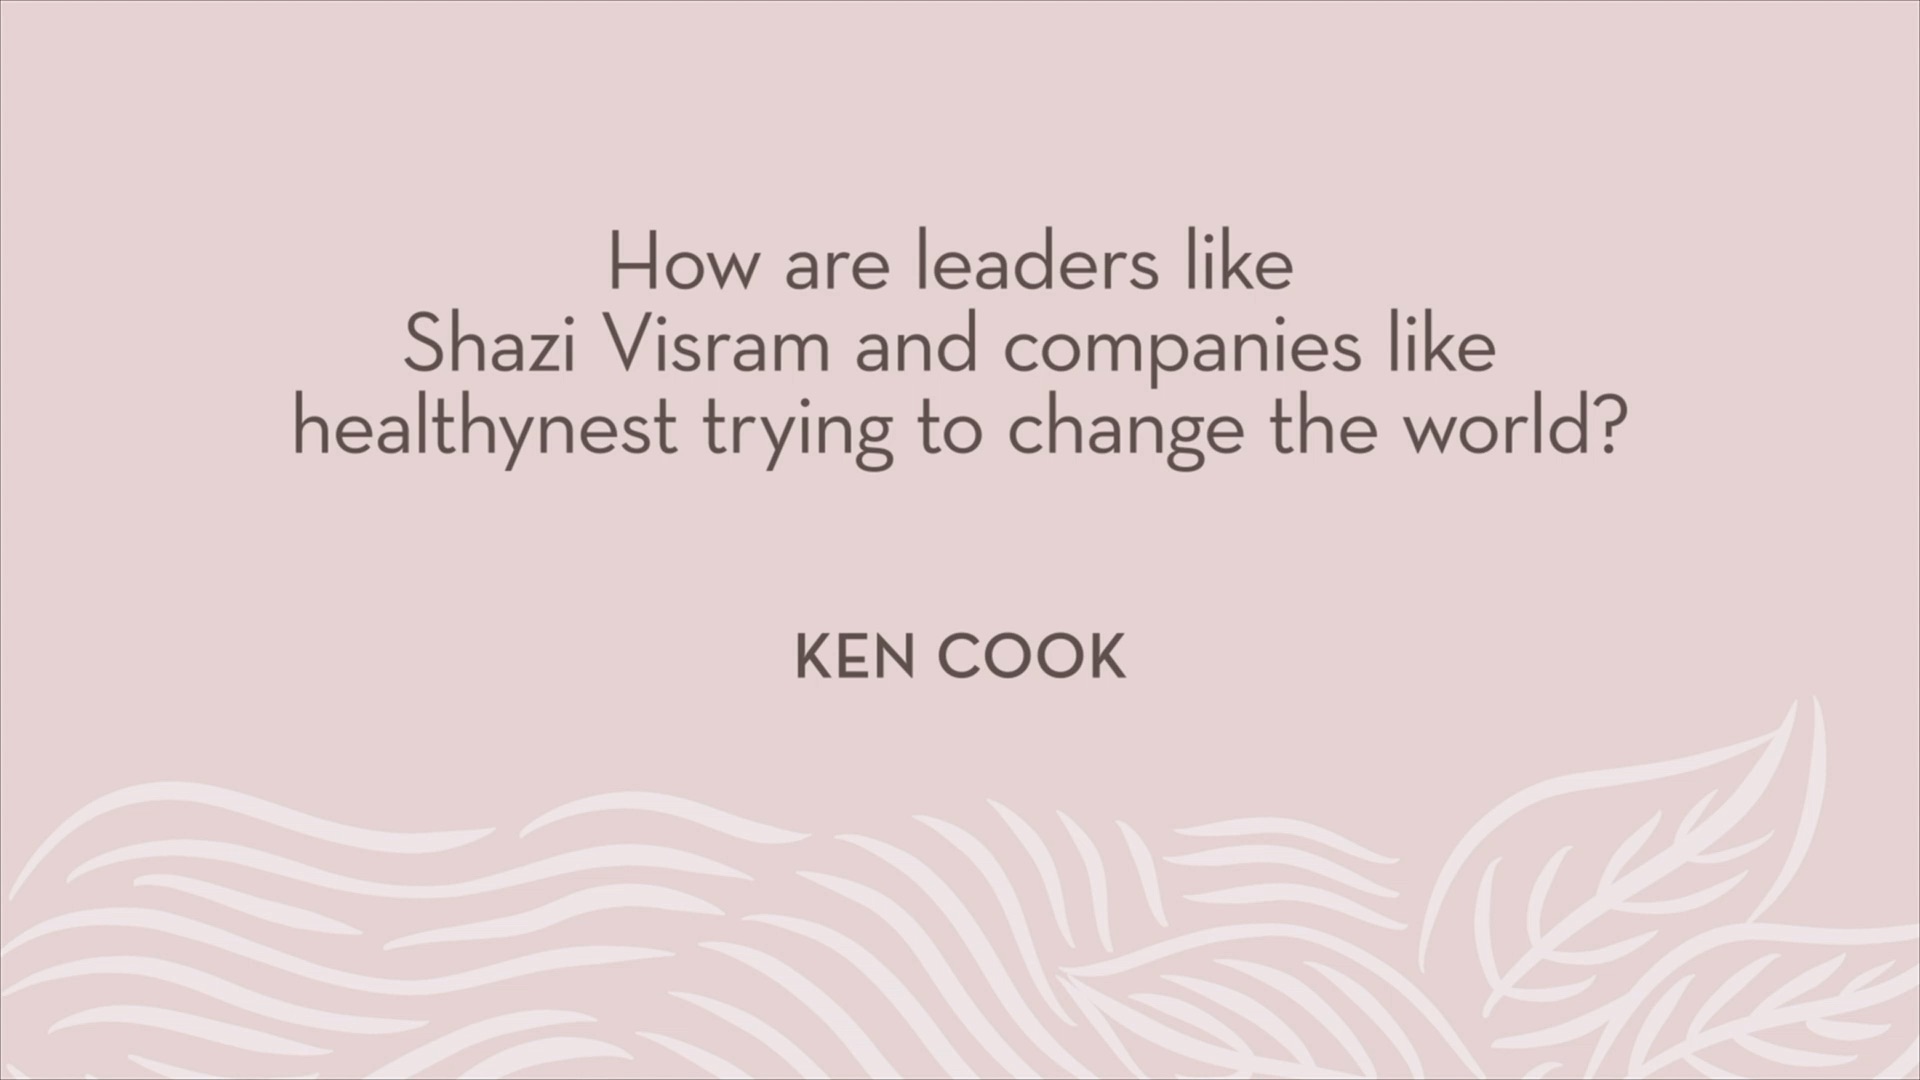 Ken Cook | How are leaders like Shazi Visram and companies like healthynest trying to change the world?